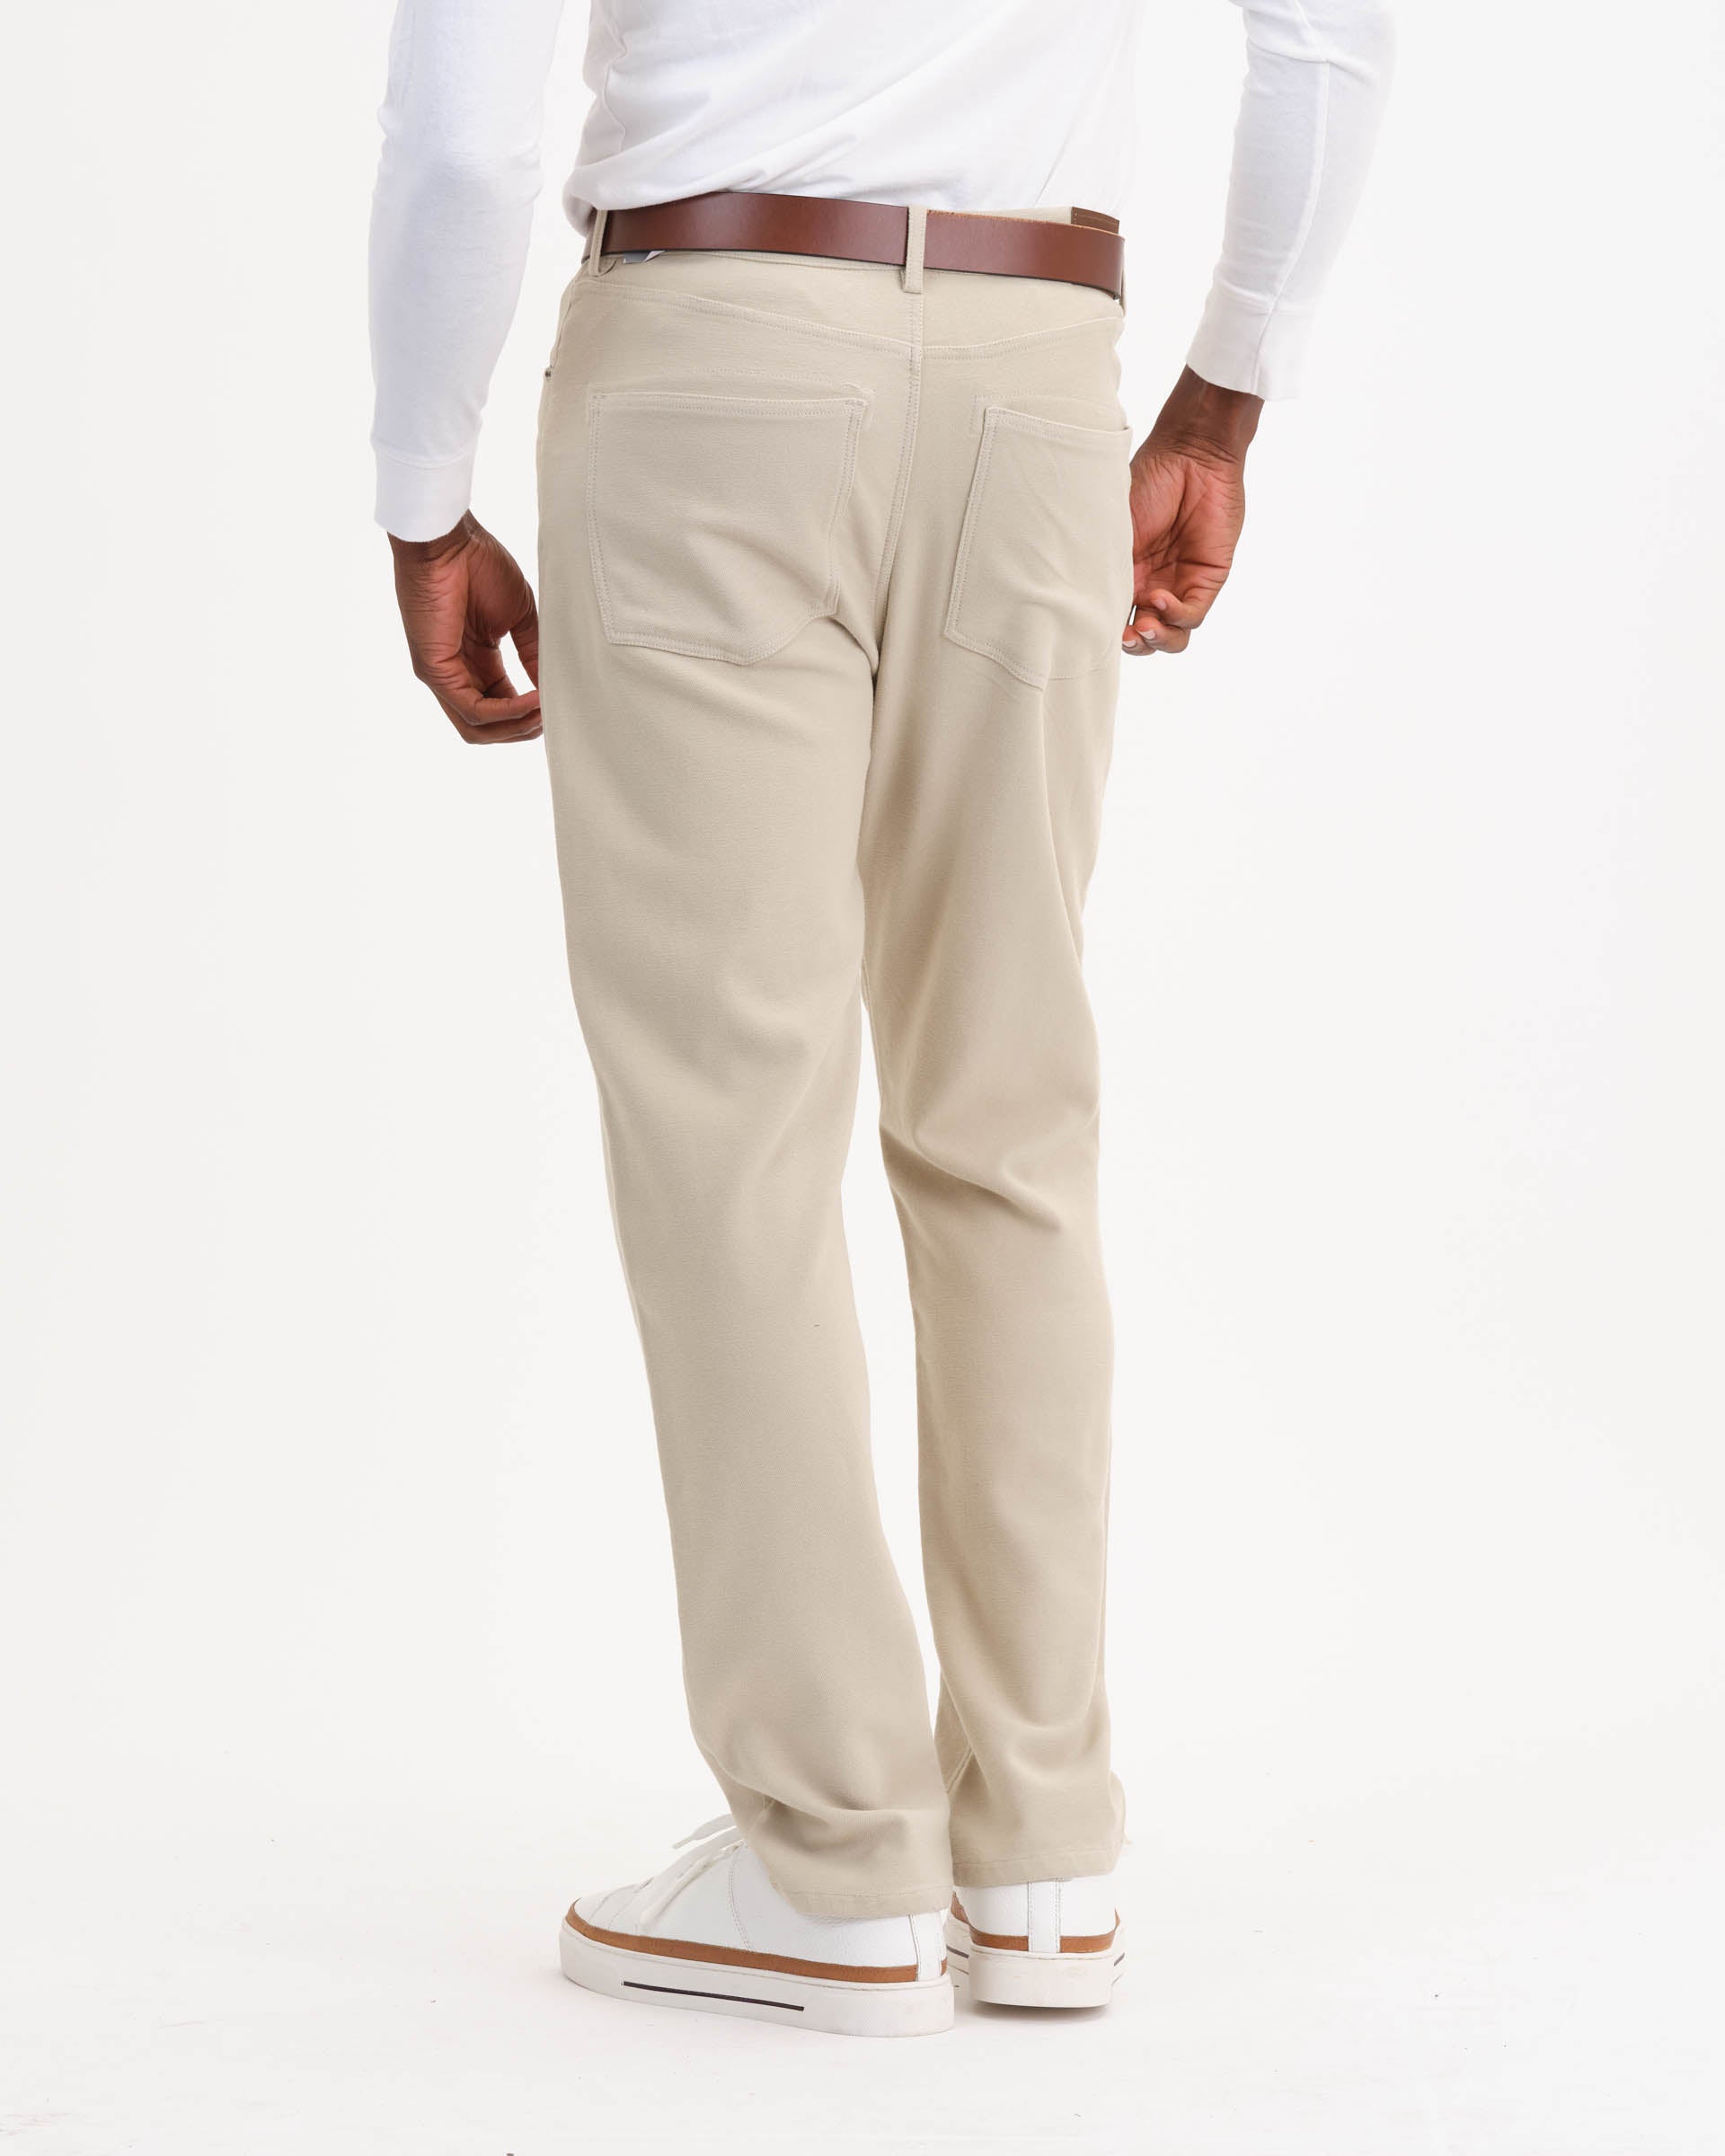 Men's 5-Pocket Fly Front Woven Pants